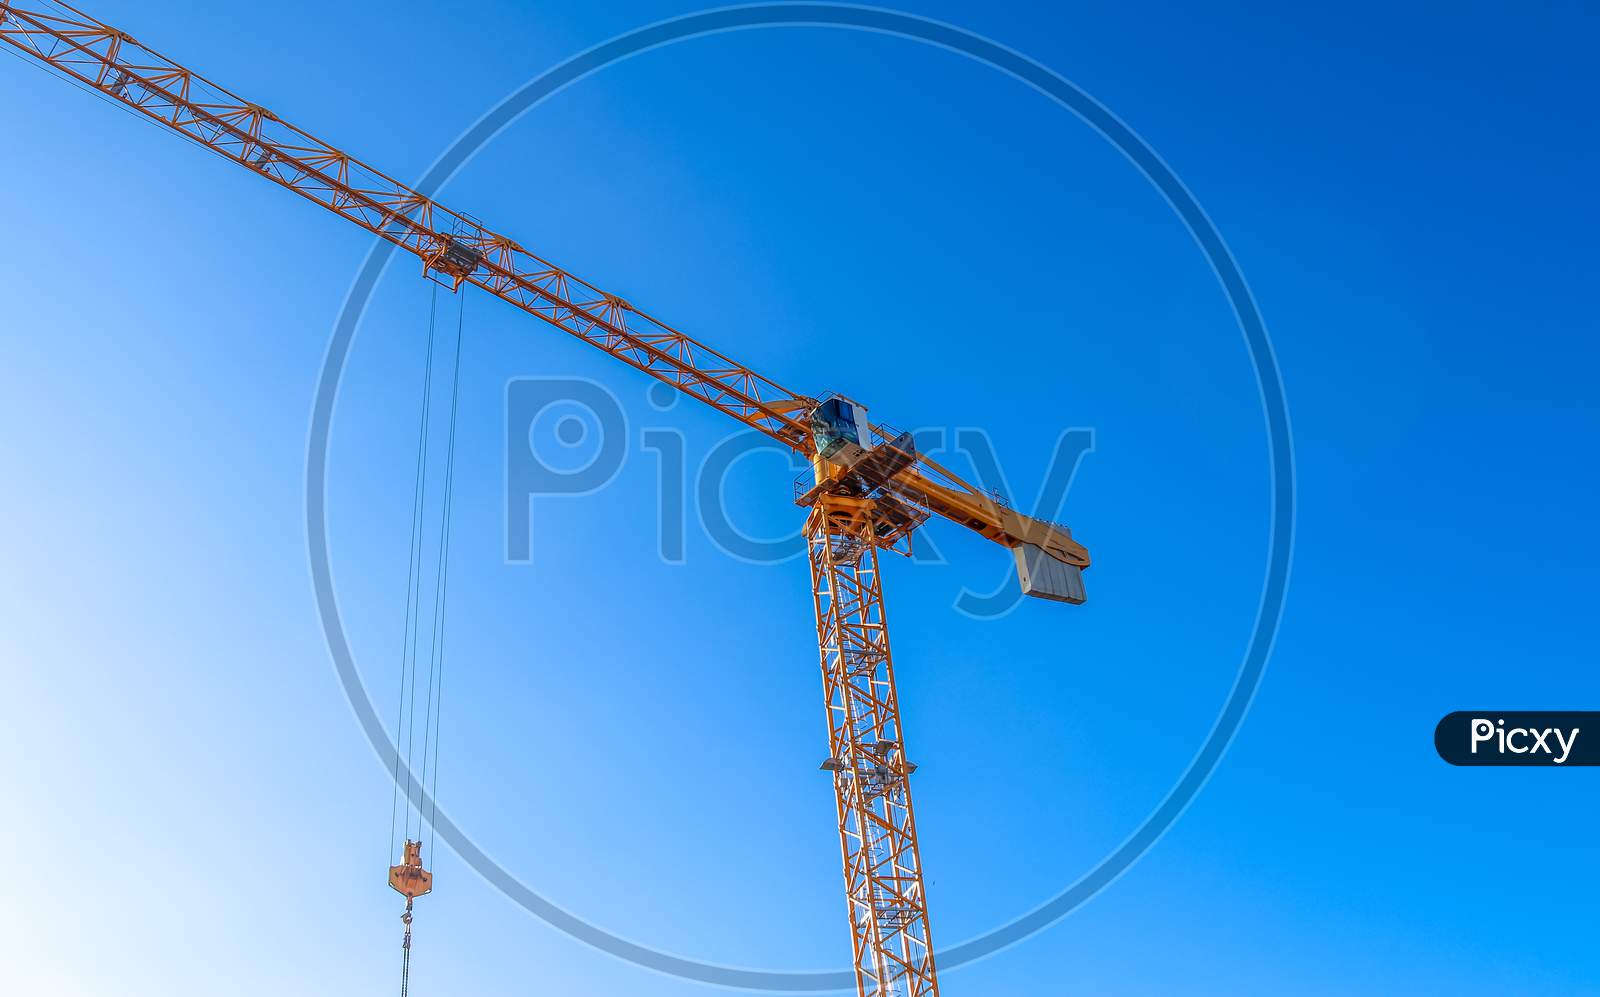 Big yellow cranes at a construction site on a sunny day